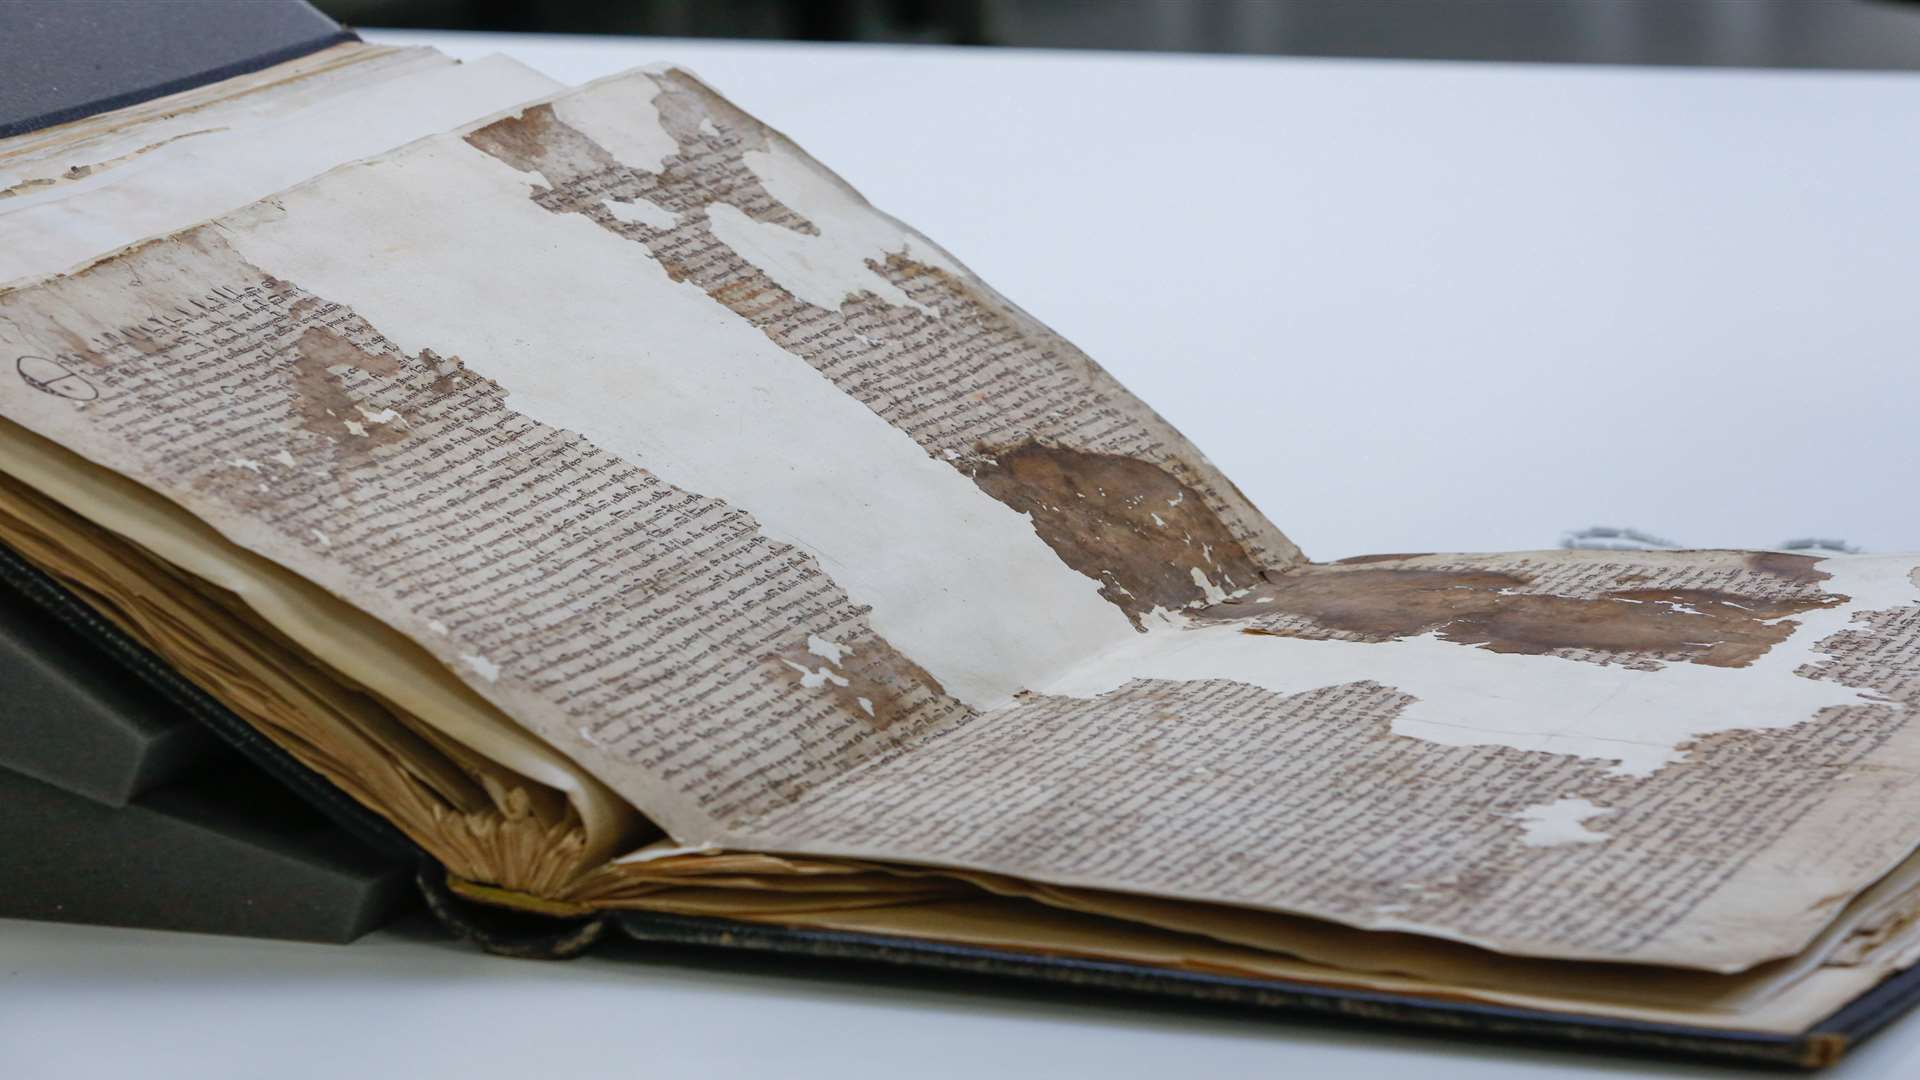 An edition of The Magna Carta found in Maidstone